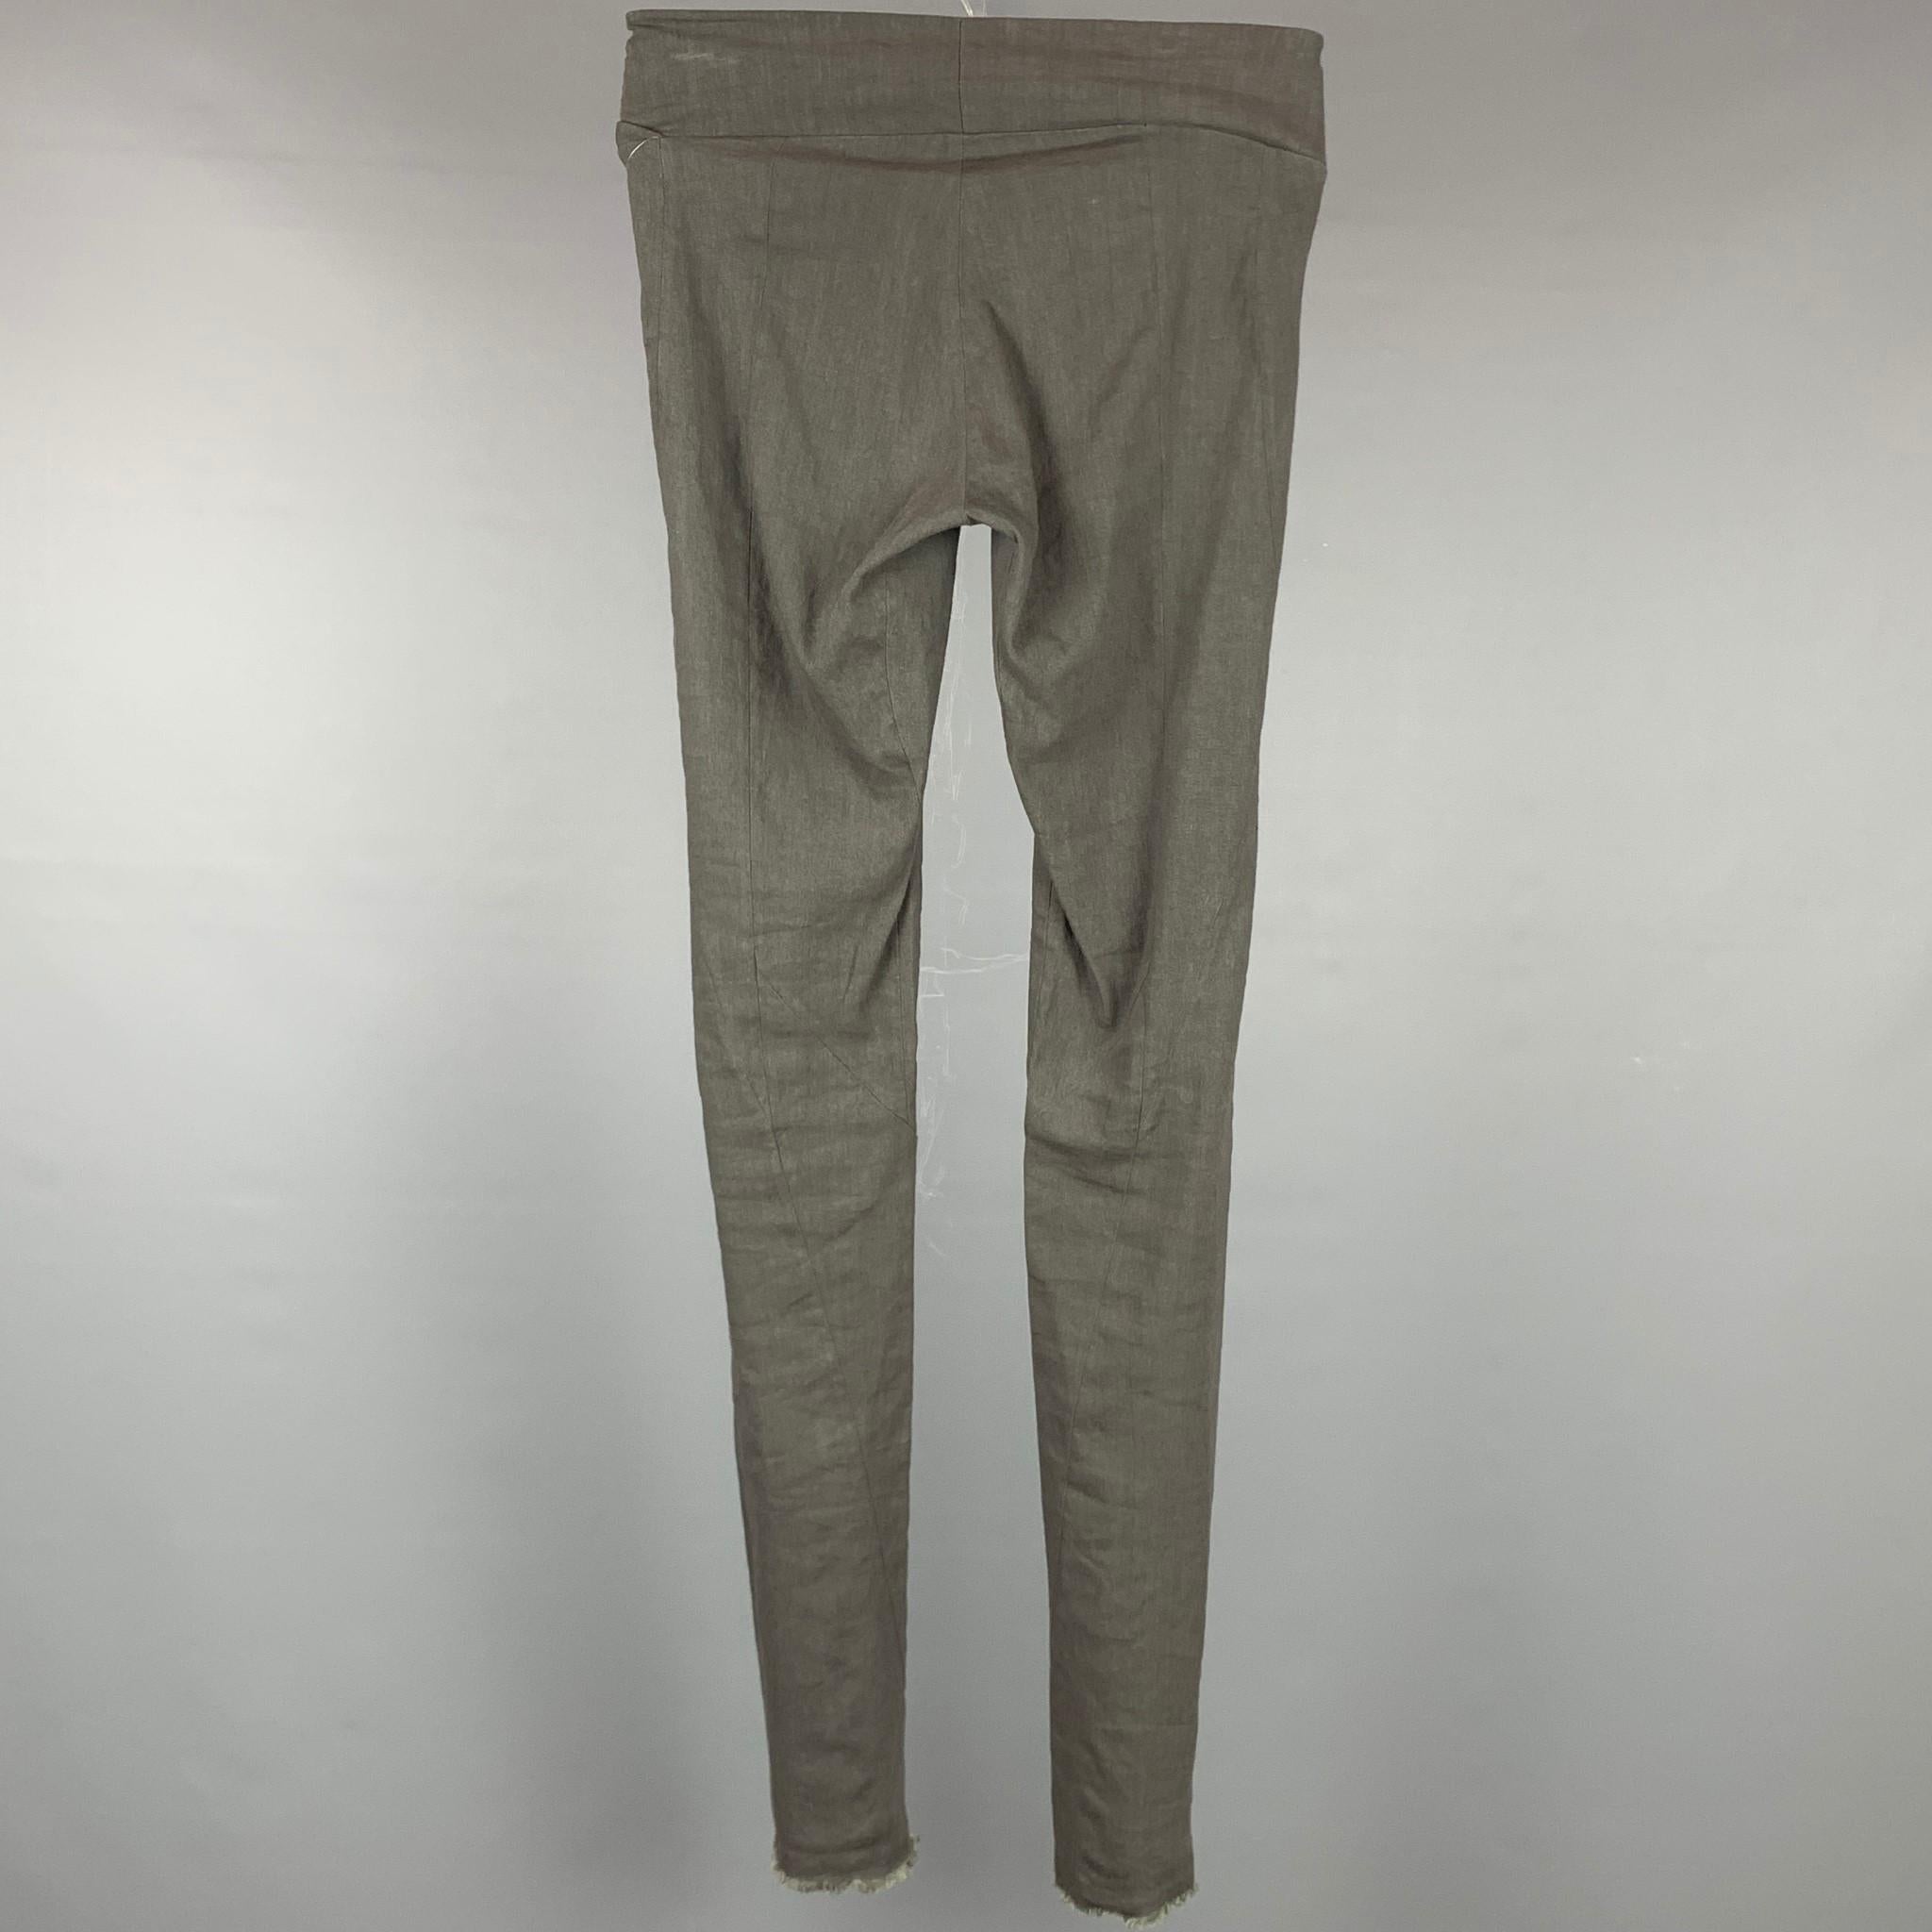 URBAN ZEN by DONNA KARAN leggings comes in a slate linen featuring a slip on style, fringe hem, and a skinny fit.

Good Pre-Owned Condition.
Marked: 2

Measurements:

Waist: 24 in.
Rise: 7 in.
Inseam: 33 in.